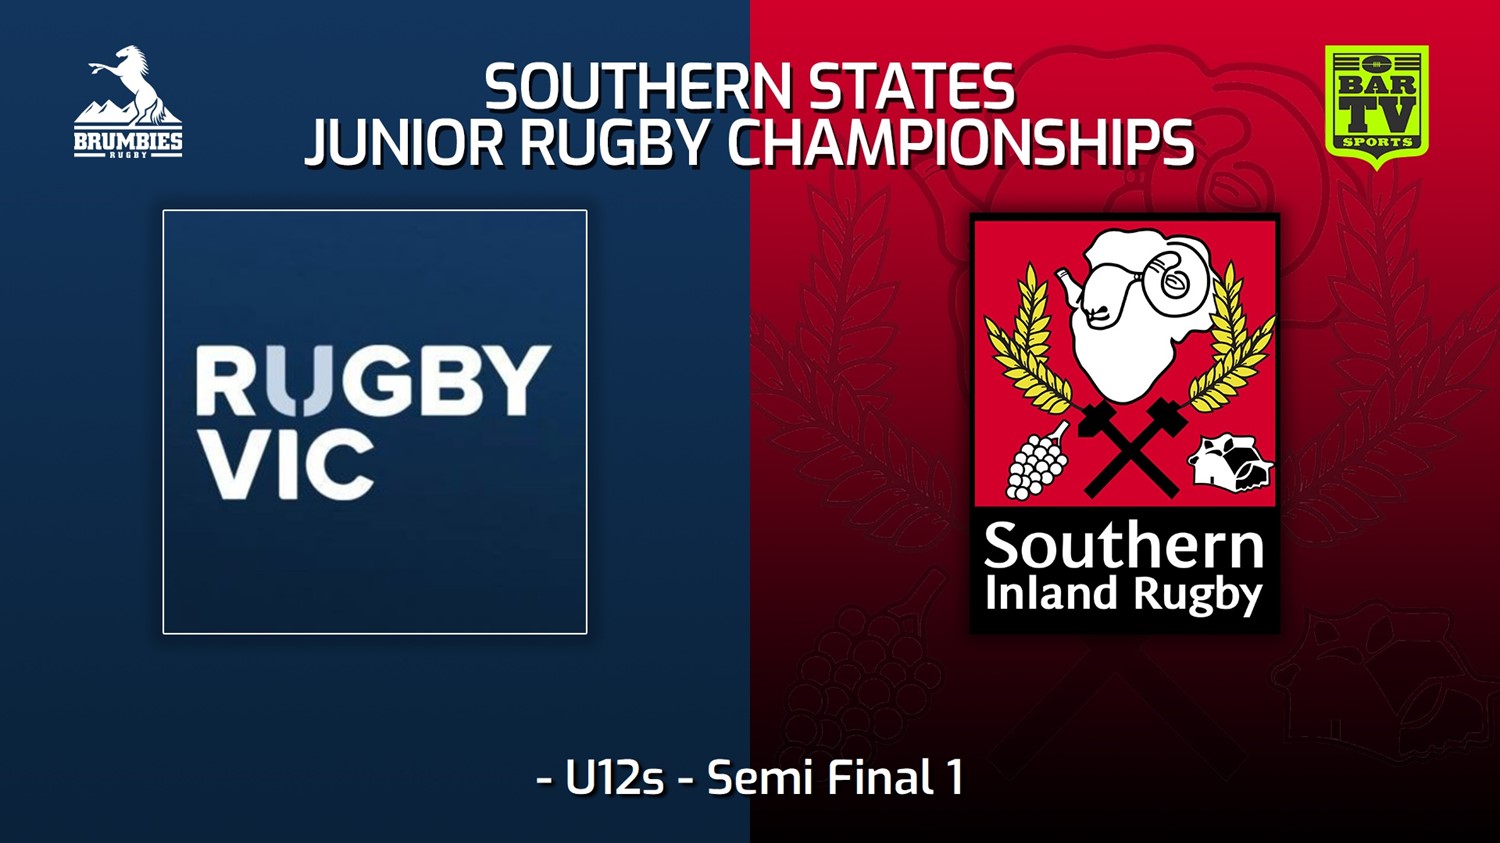 220713-2022 Southern States Junior Rugby Championships U12s - Semi Final 1 - Rugby Victoria v Southern Inland Slate Image